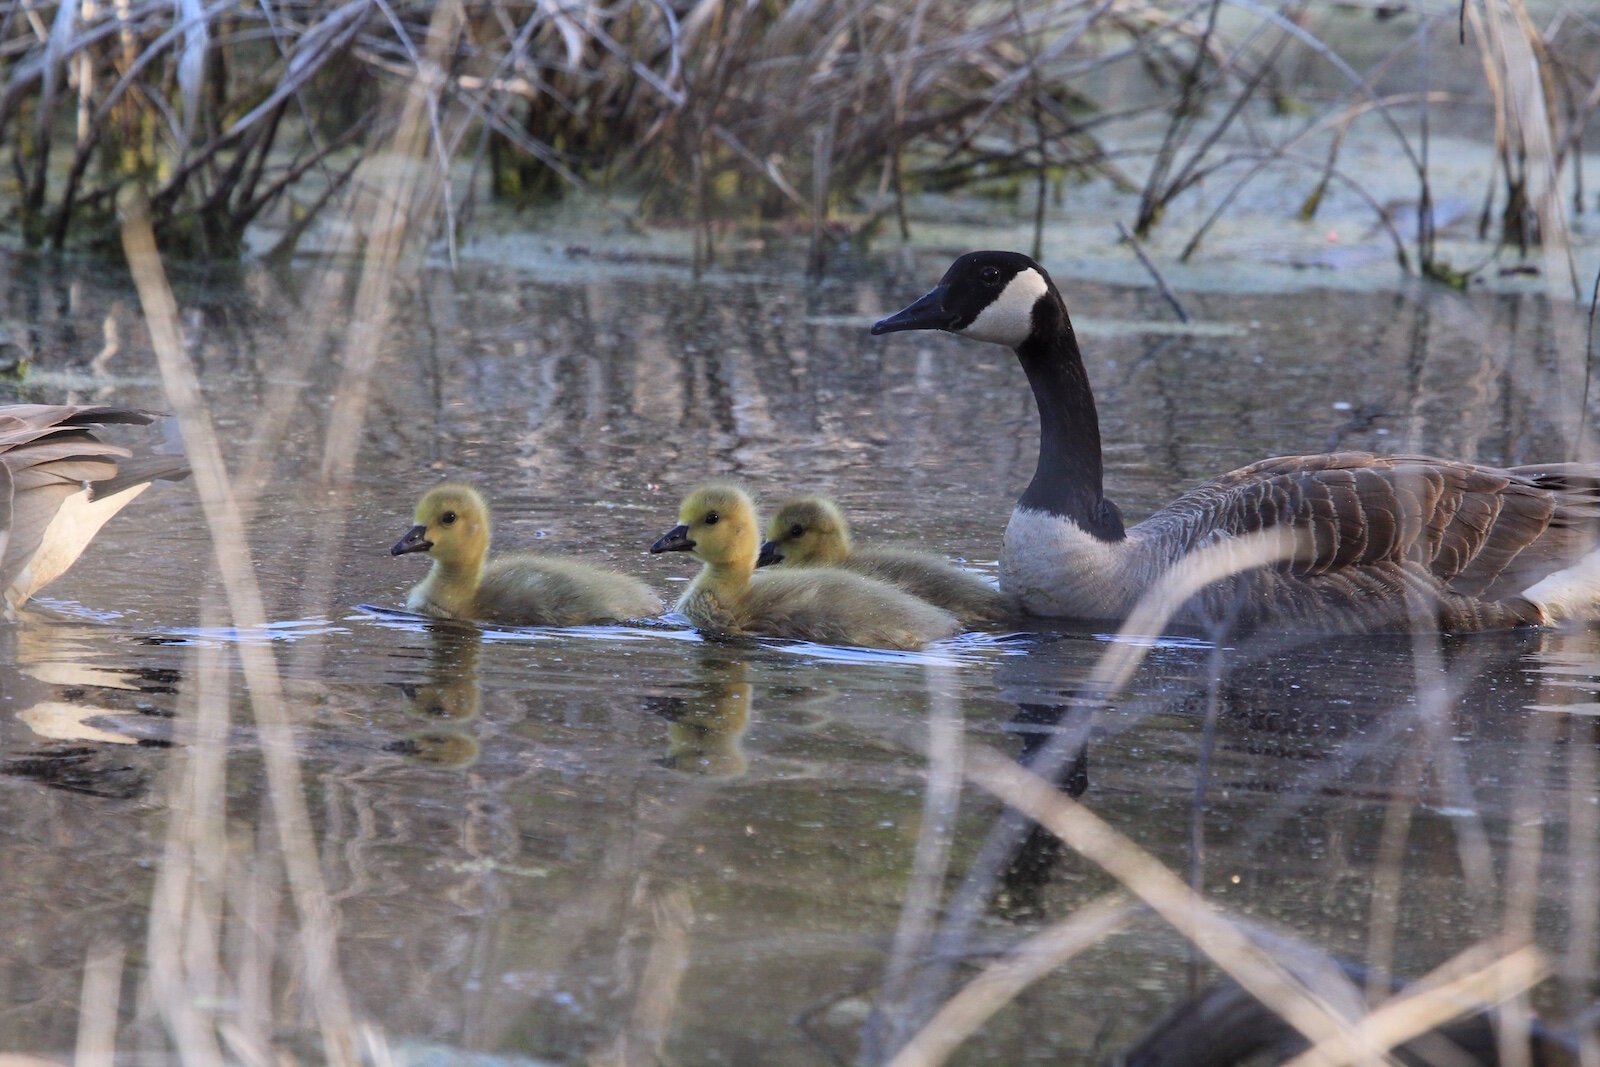 Wildlife in the Kleinstuck Preserve includes this gaggle of Canada geese.